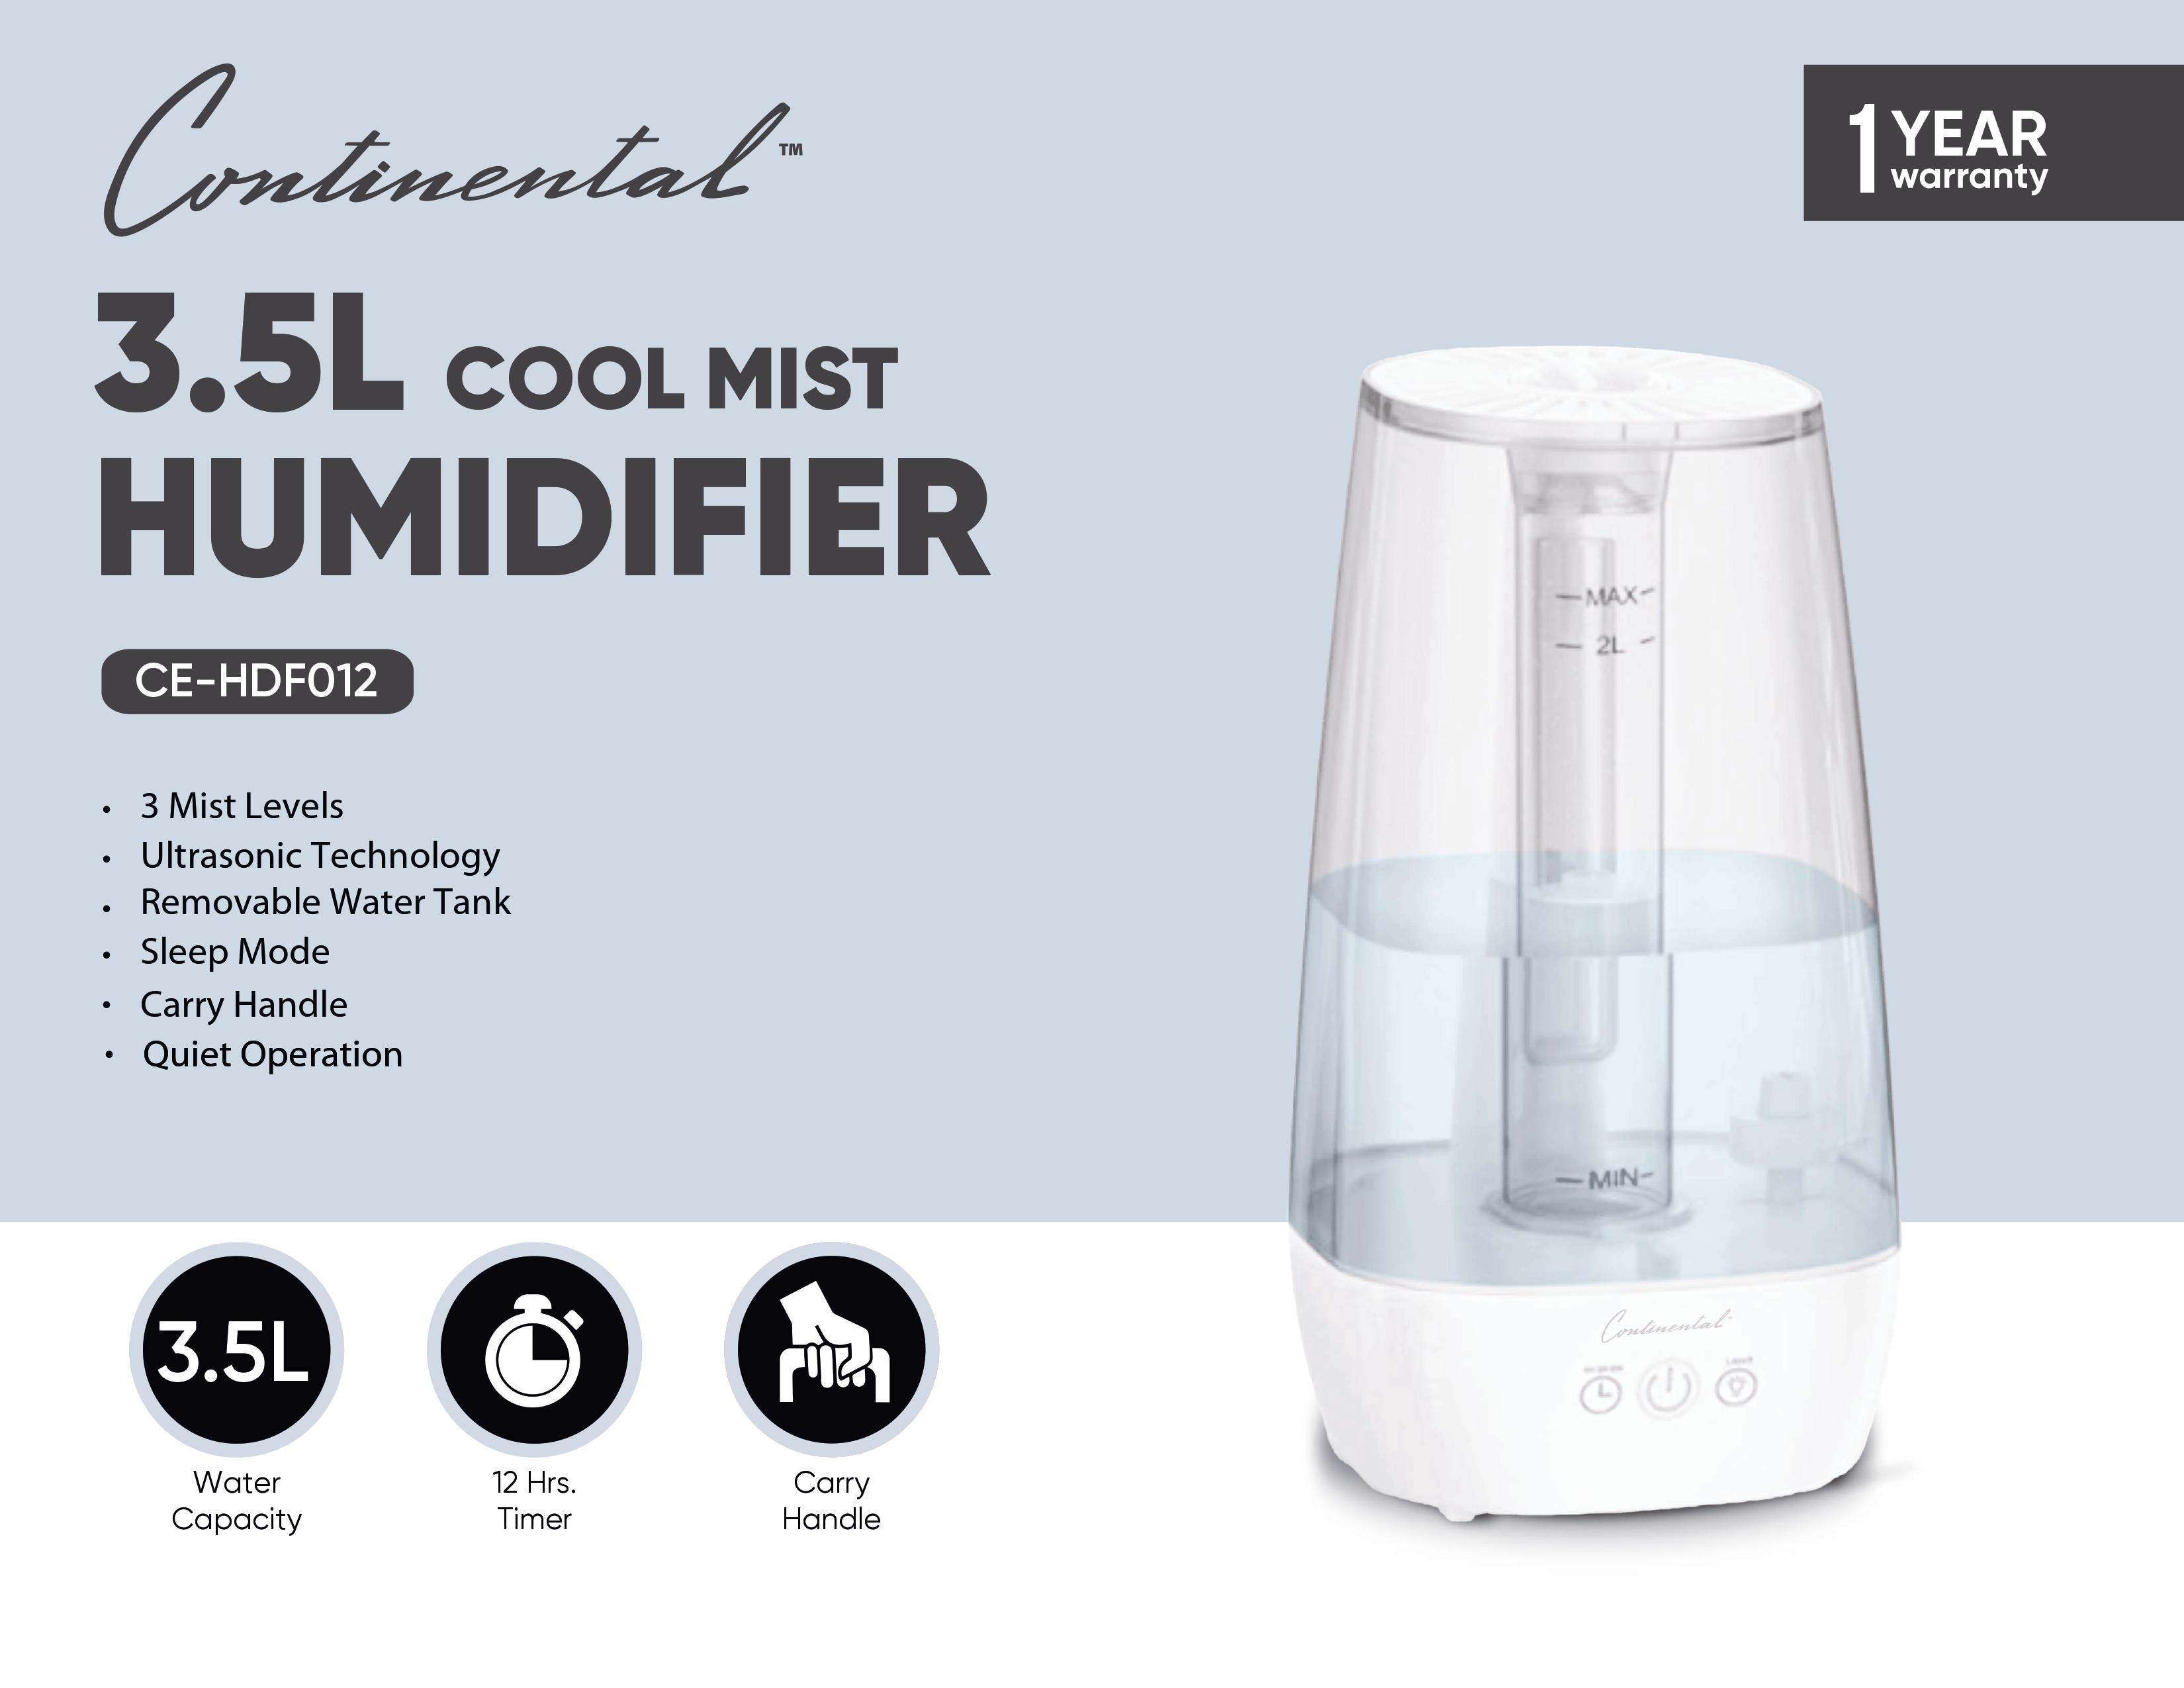 3.5 COOL MIST HUMIDIFIER